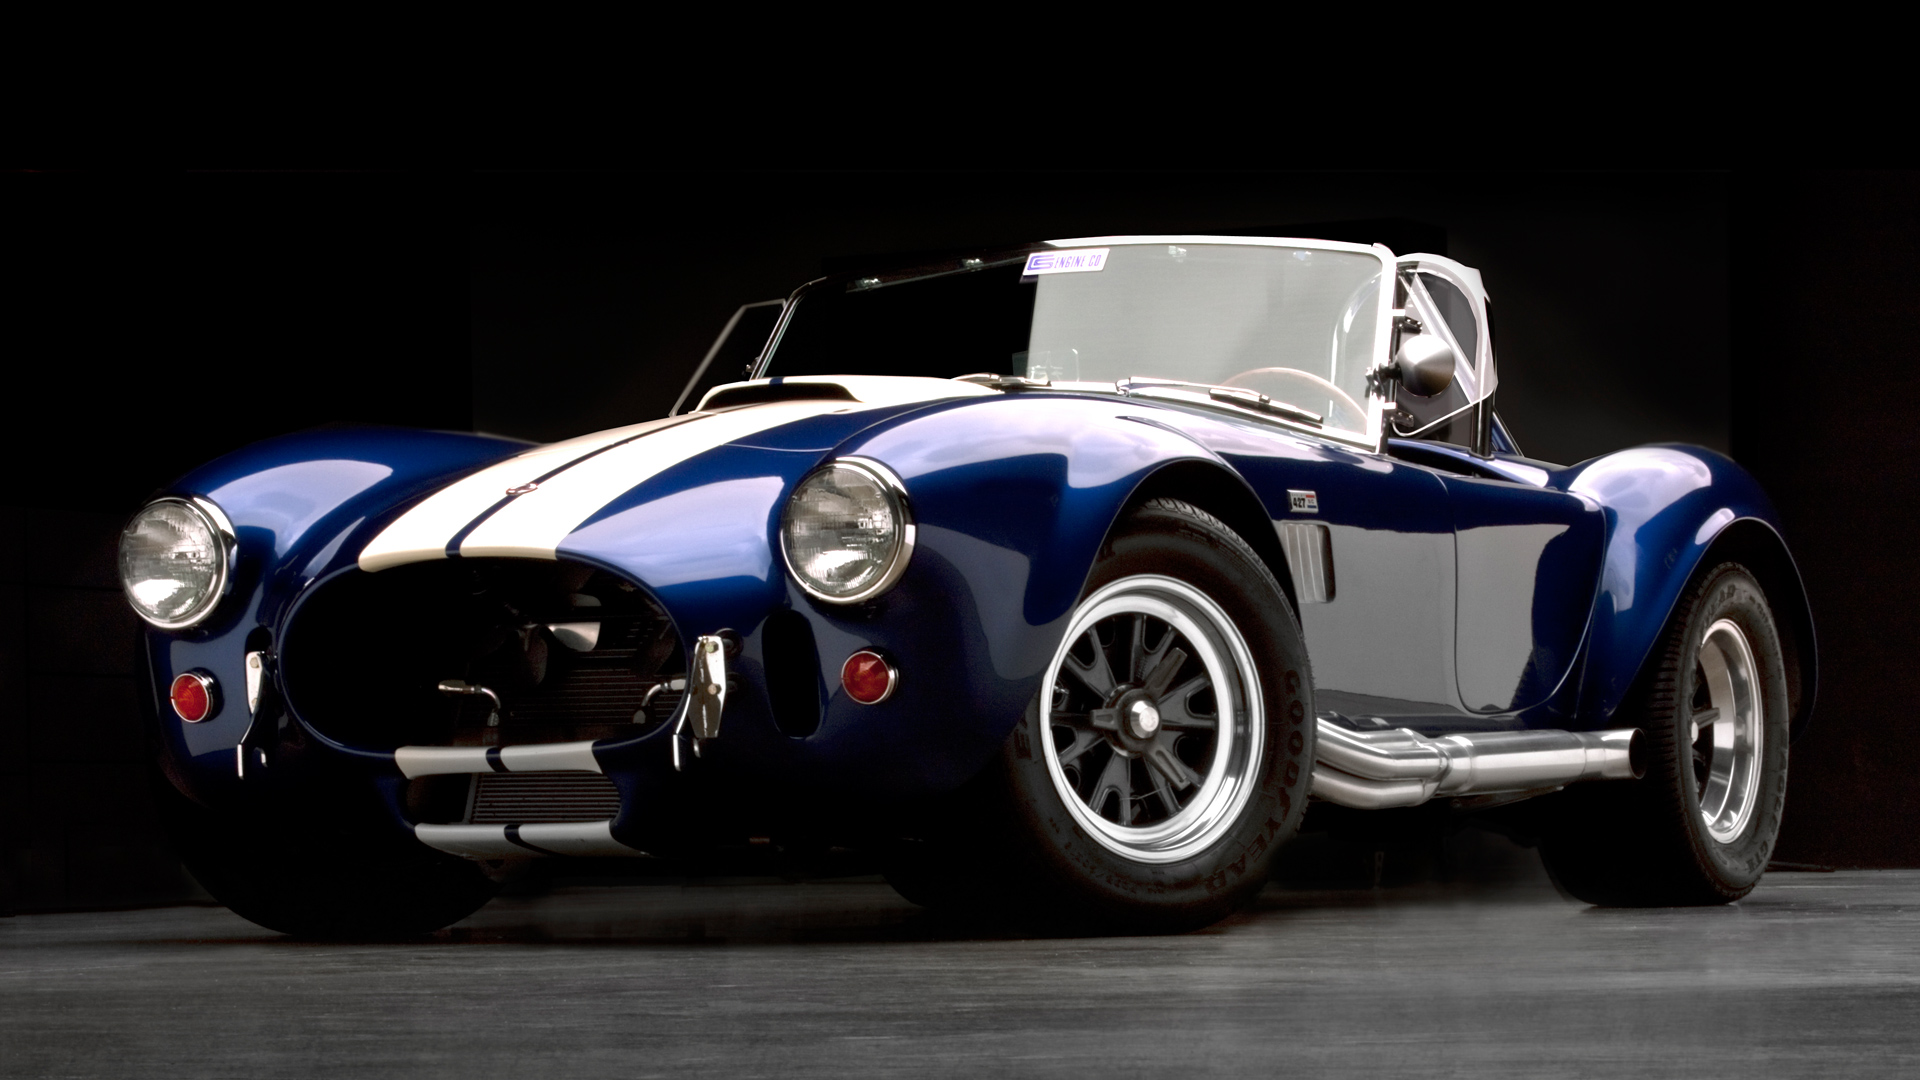 Shelby Cobra Wallpapers Vehicles Hq Shelby Cobra Pictures 4k Wallpapers 2019